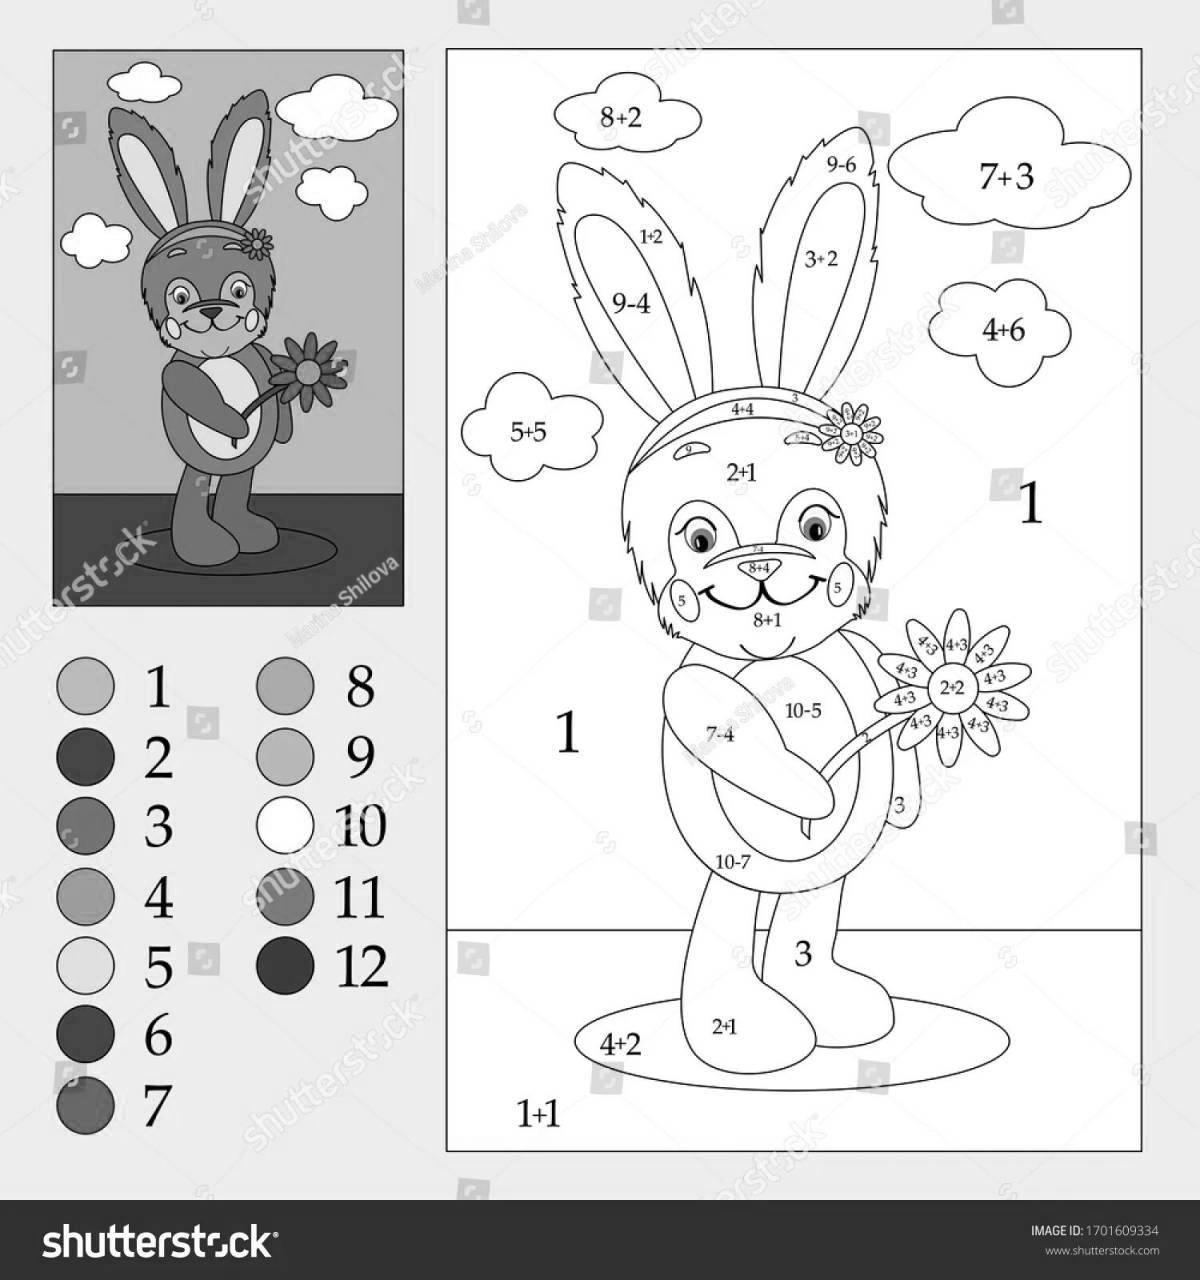 Magic bunny coloring by numbers